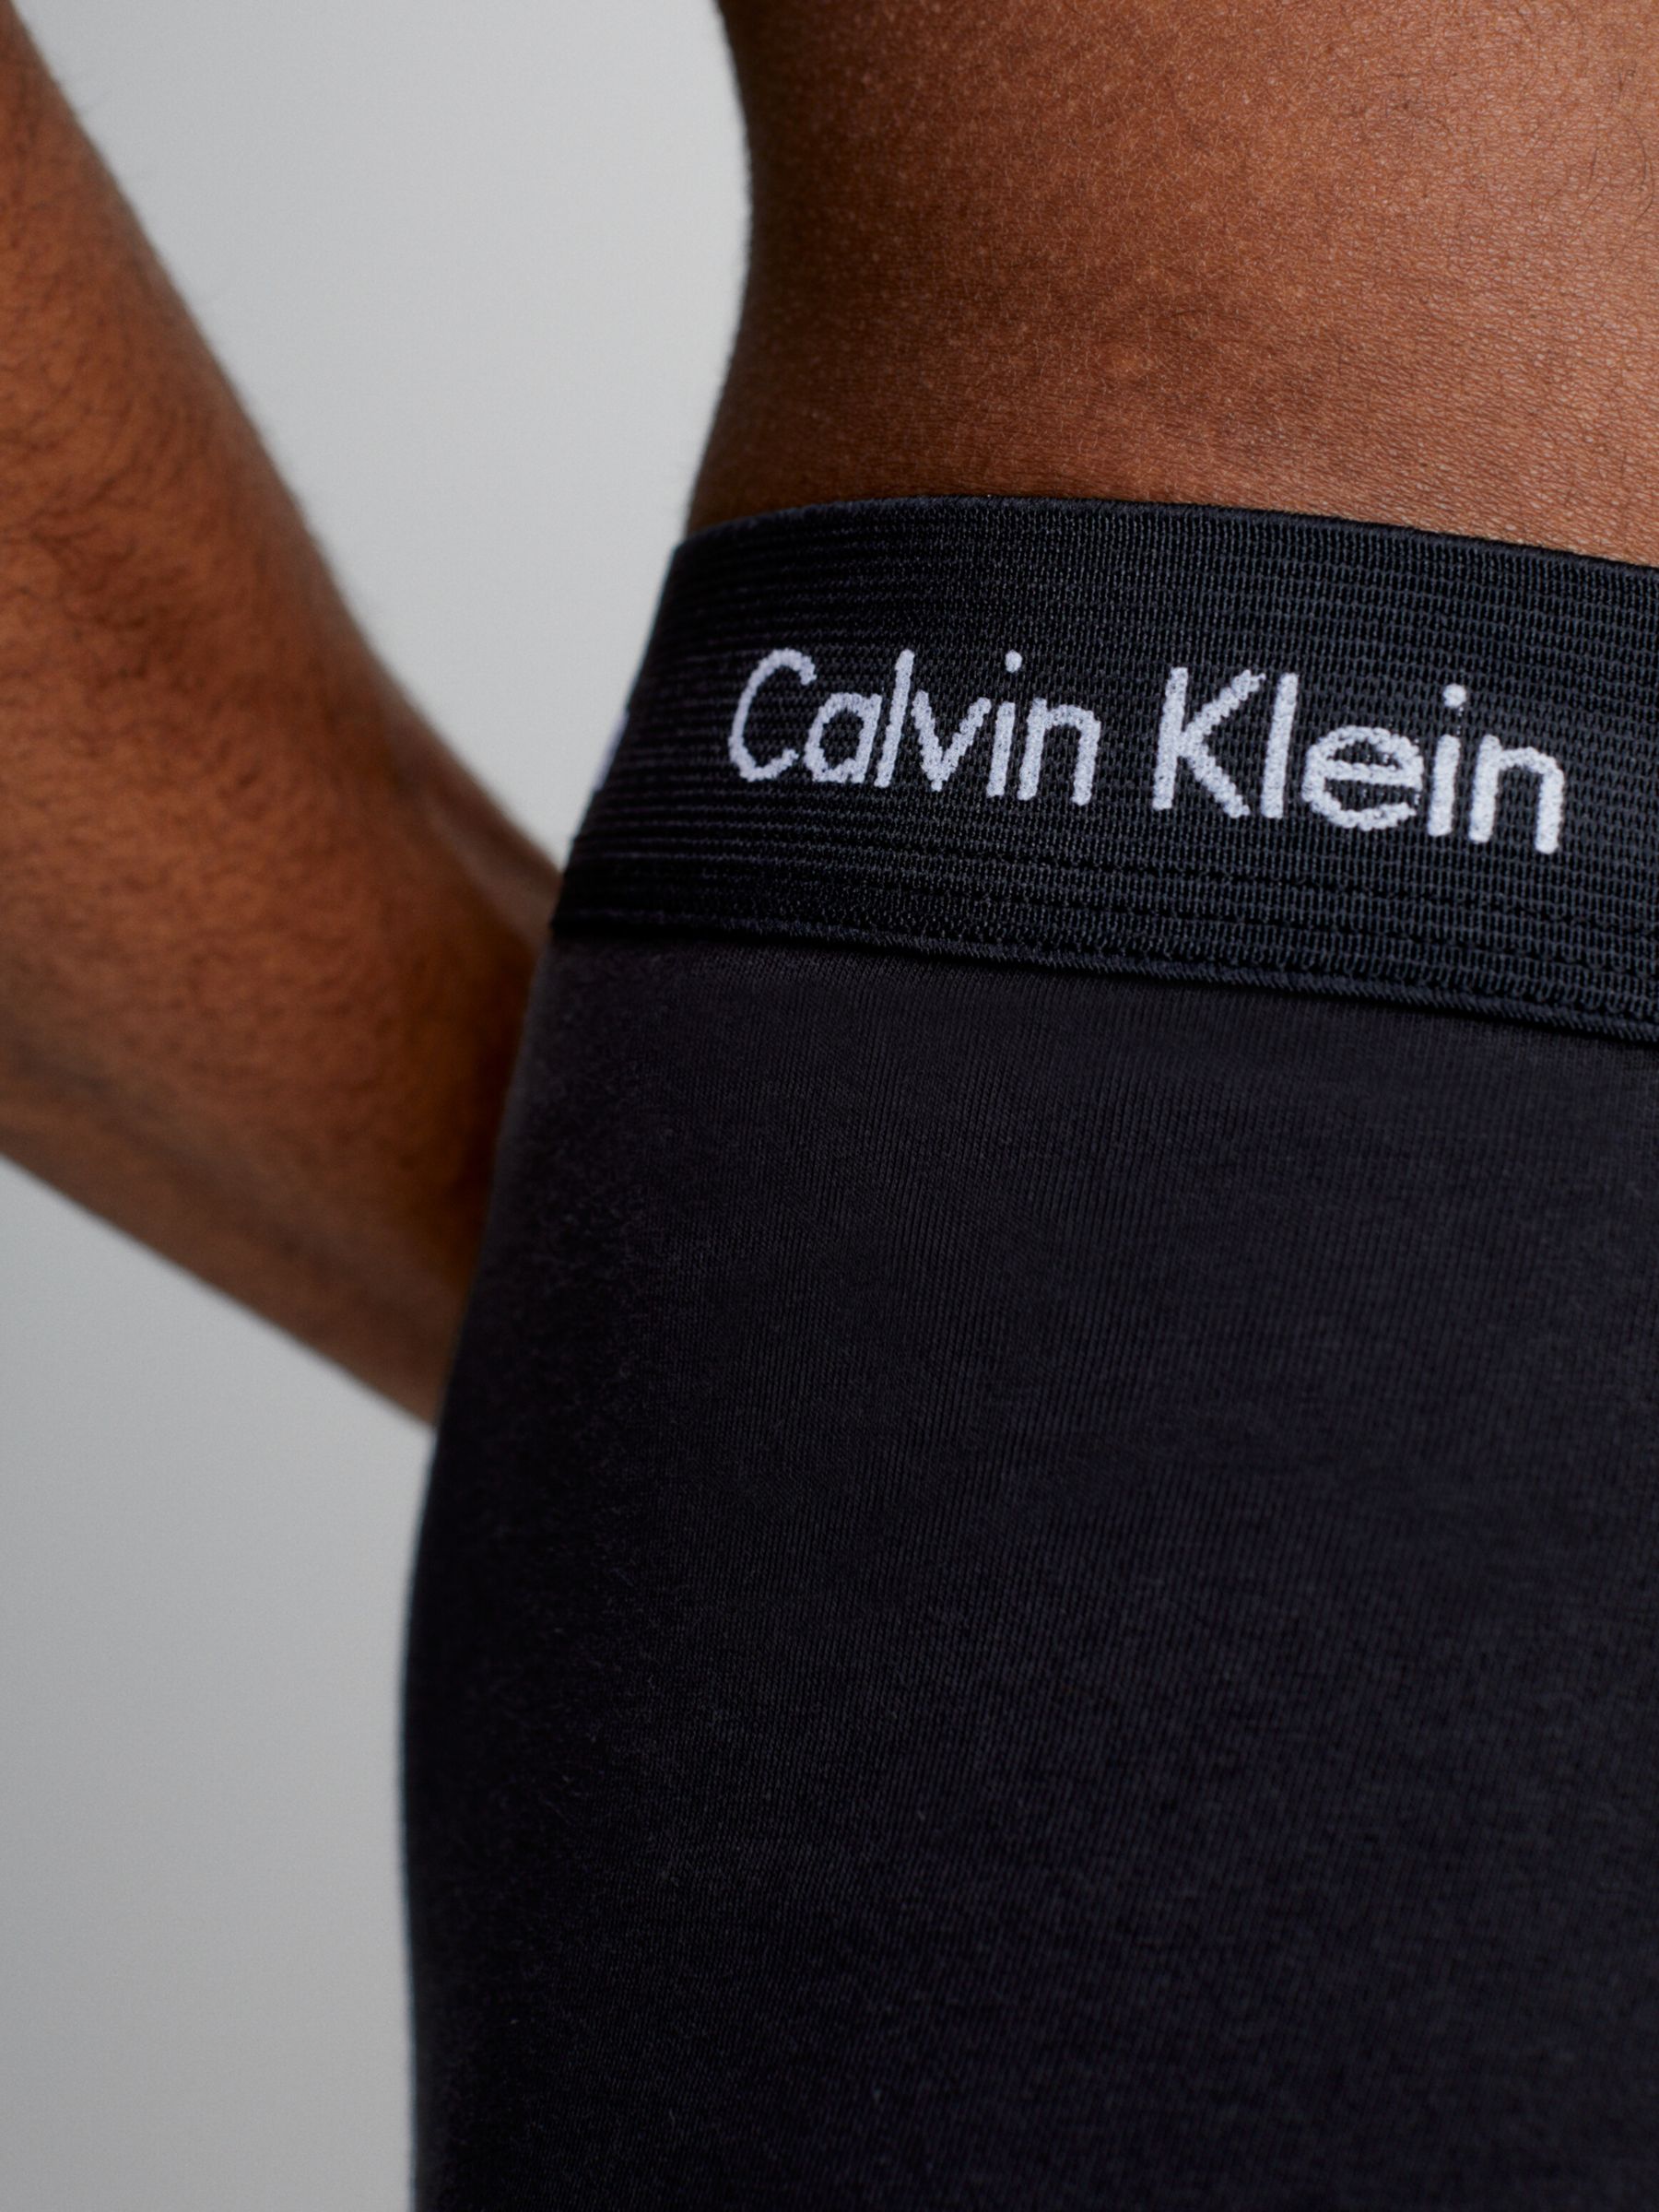 Underwear for men UK 2022: boxers, briefs and y-fronts from Calvin